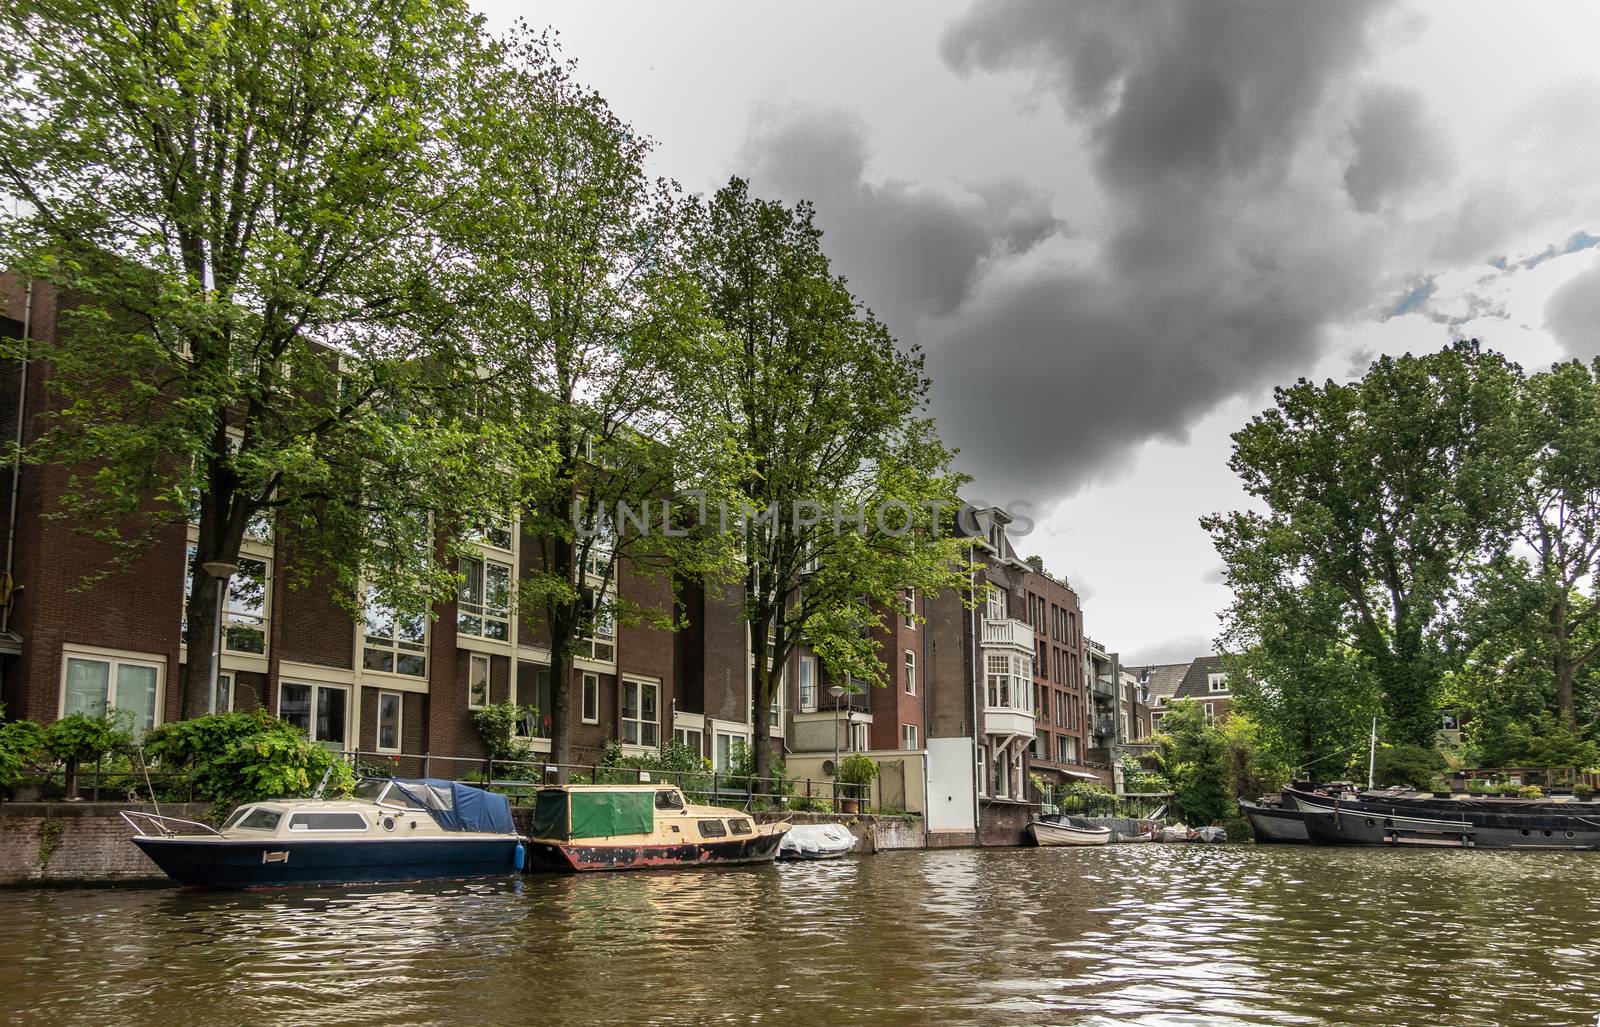 Amsterdam, the Netherlands - July 1, 2019: Peaceful canal boat with houseboats, green trees and apartment buildings under heavy cloudscape. Greenish water.